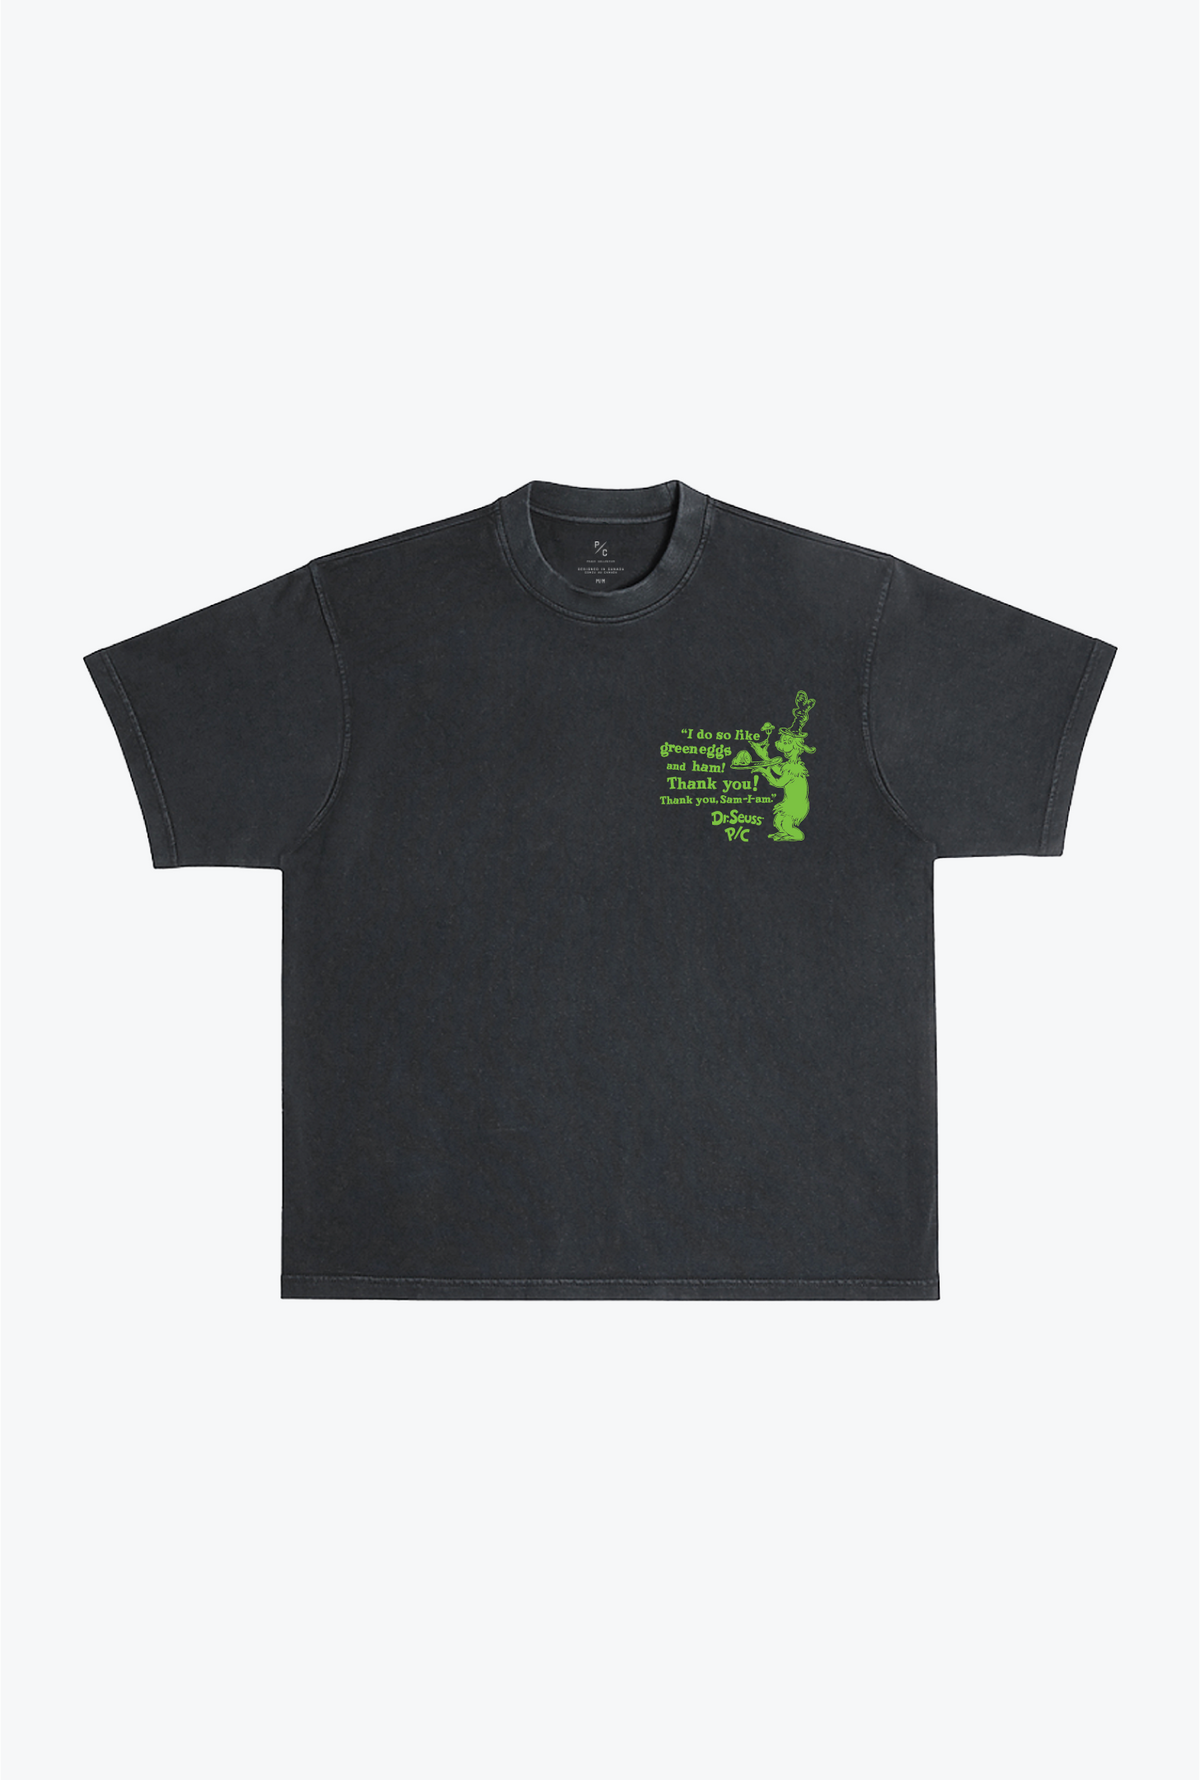 Green Eggs and Ham Quote T-Shirt - Pigment Dye Black